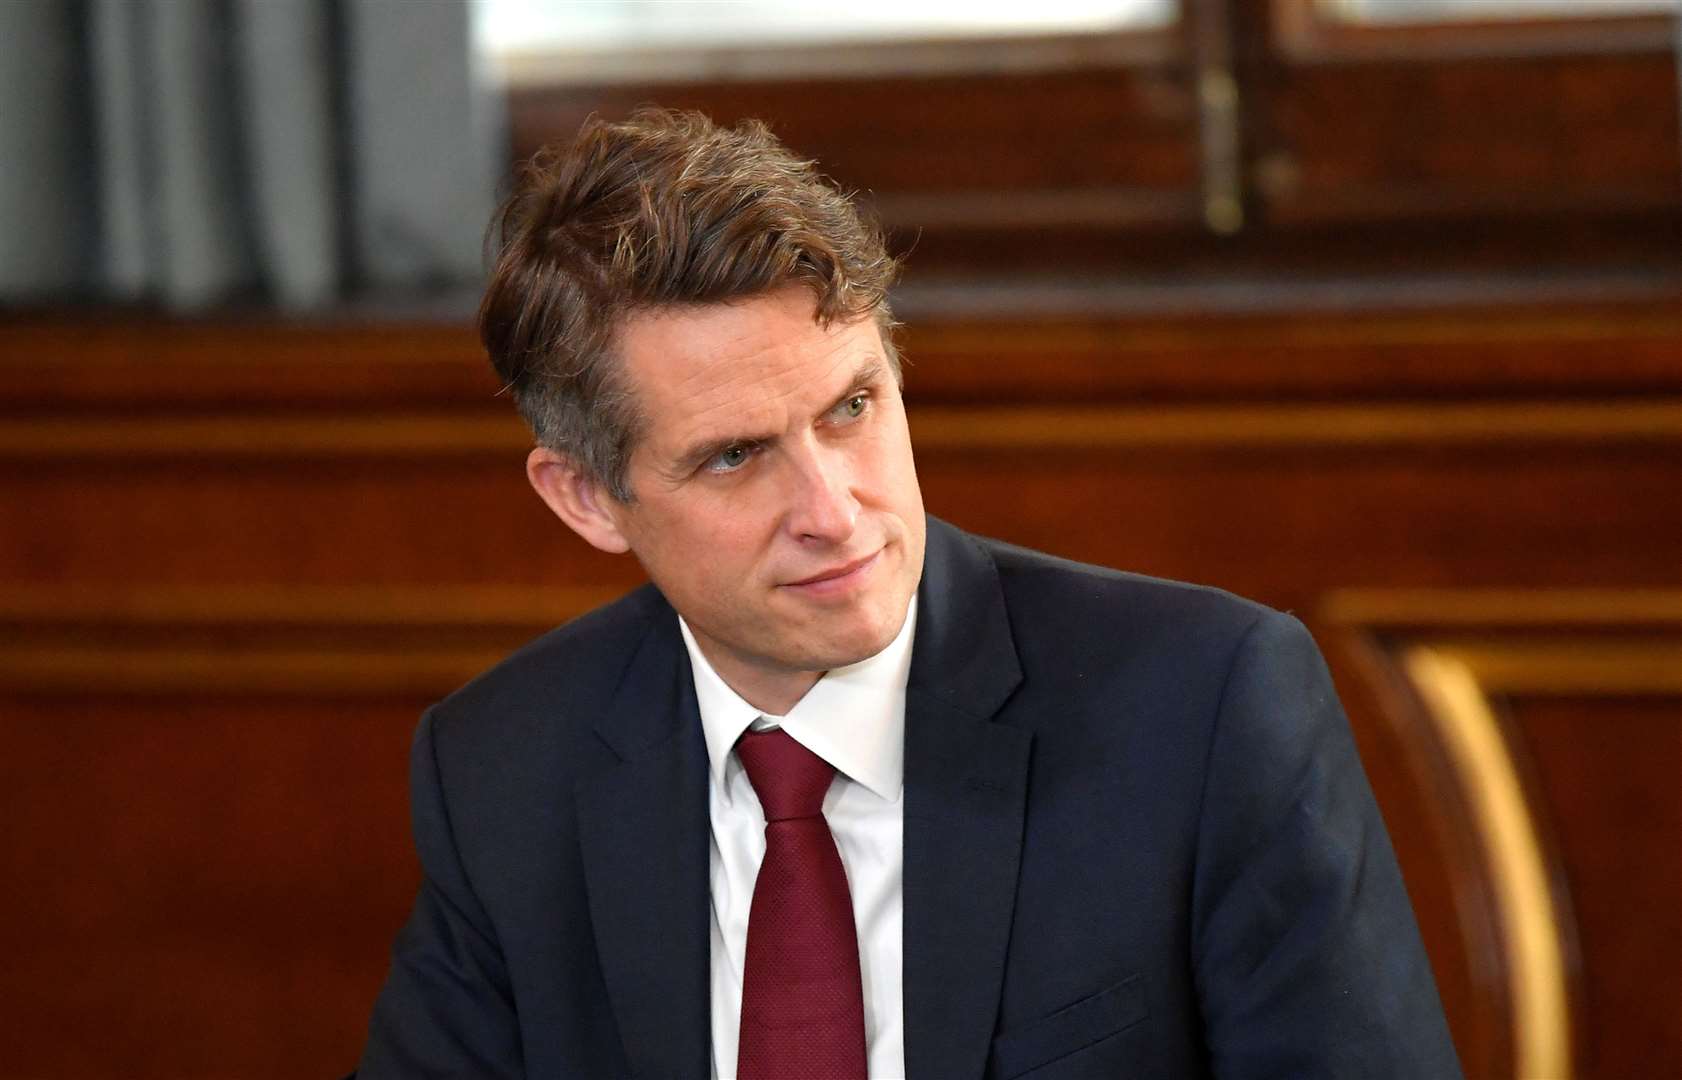 Education Secretary Gavin Williamson is considering longer school days and a shorter summer holiday to help pupils catch up (Toby Melville/PA)